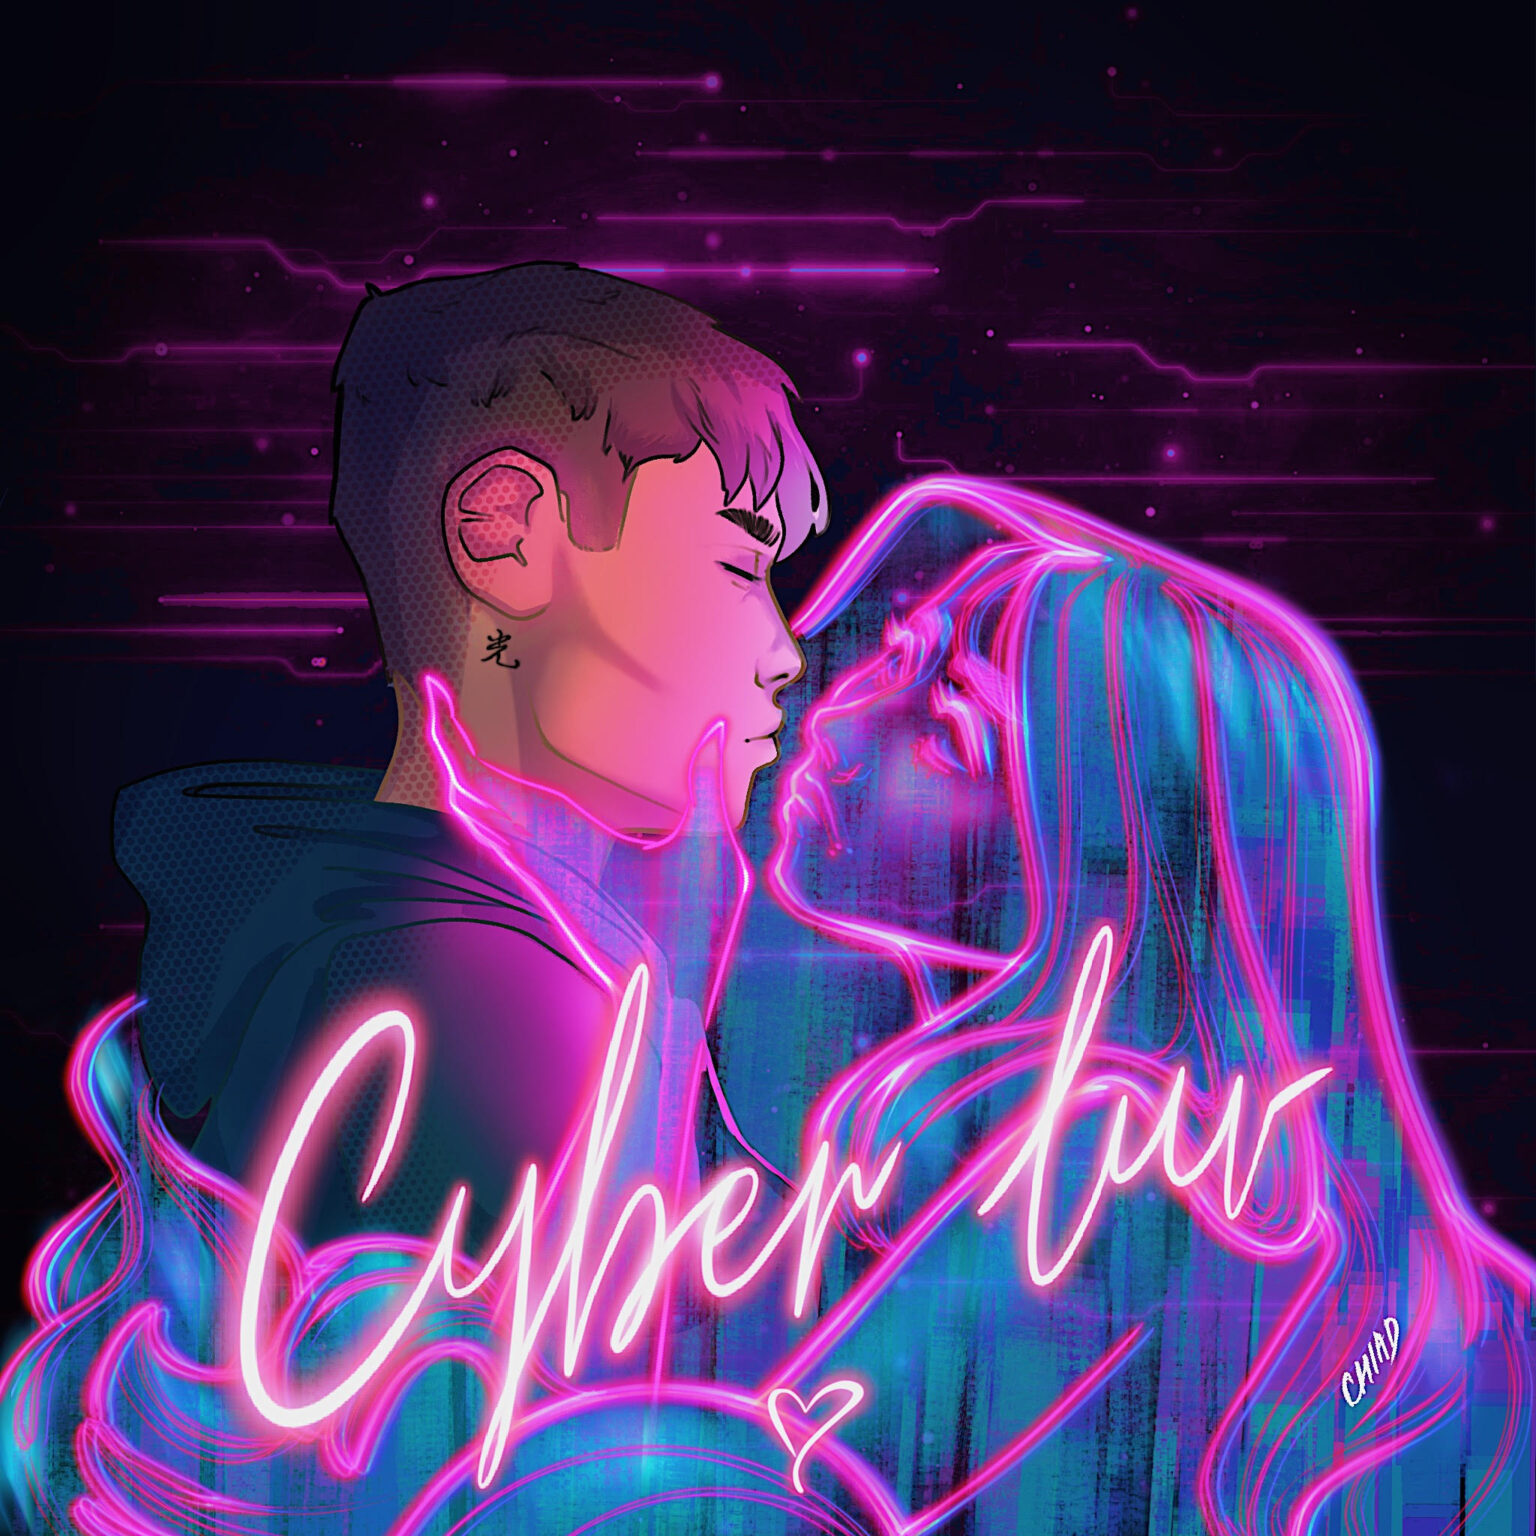 Connor Angels Releases New Single Cyberluv